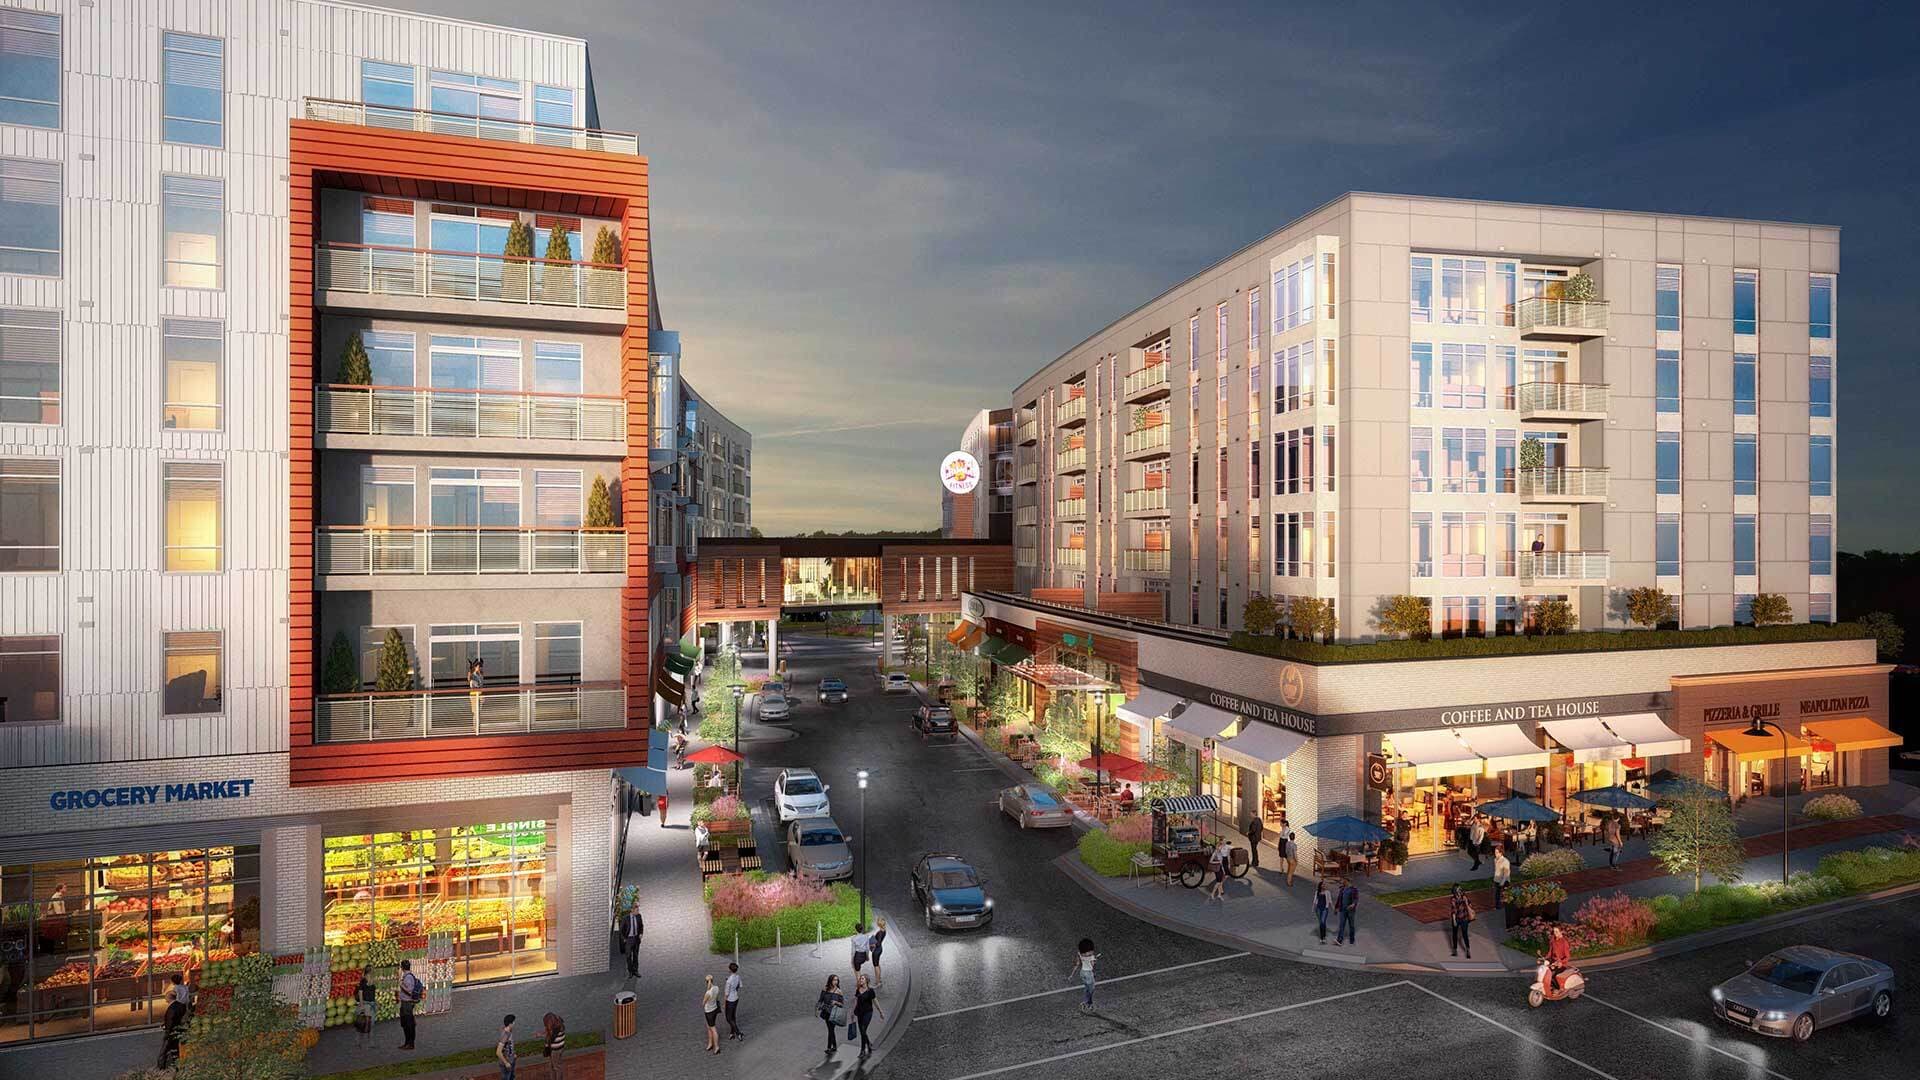 Construction has started on Southern Gateway, a project that will help transform the Baltimore Avenue corridor in College Park with nearly 400 apartments and over 60,000 square feet of street-level retail space.